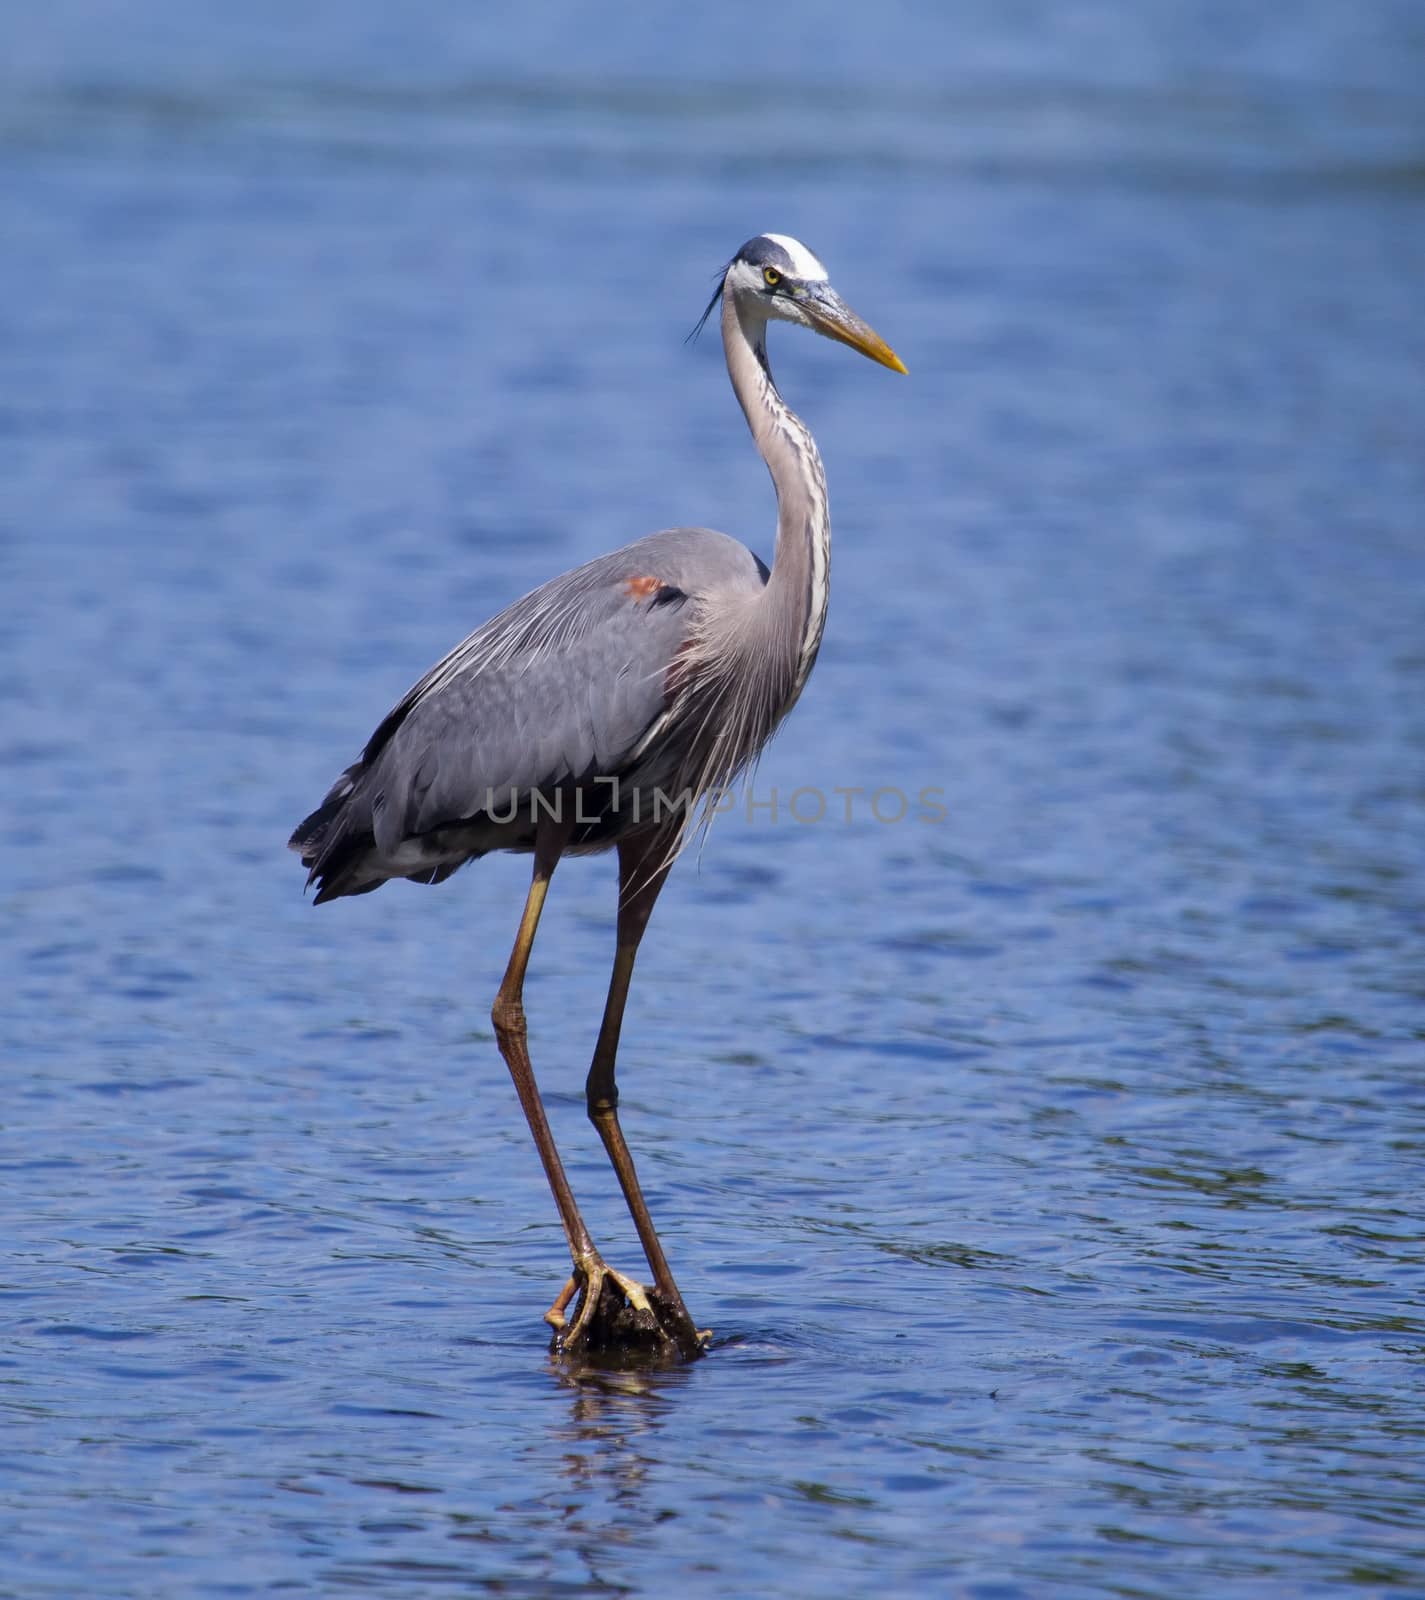 Great Blue Heron fishing in a pond